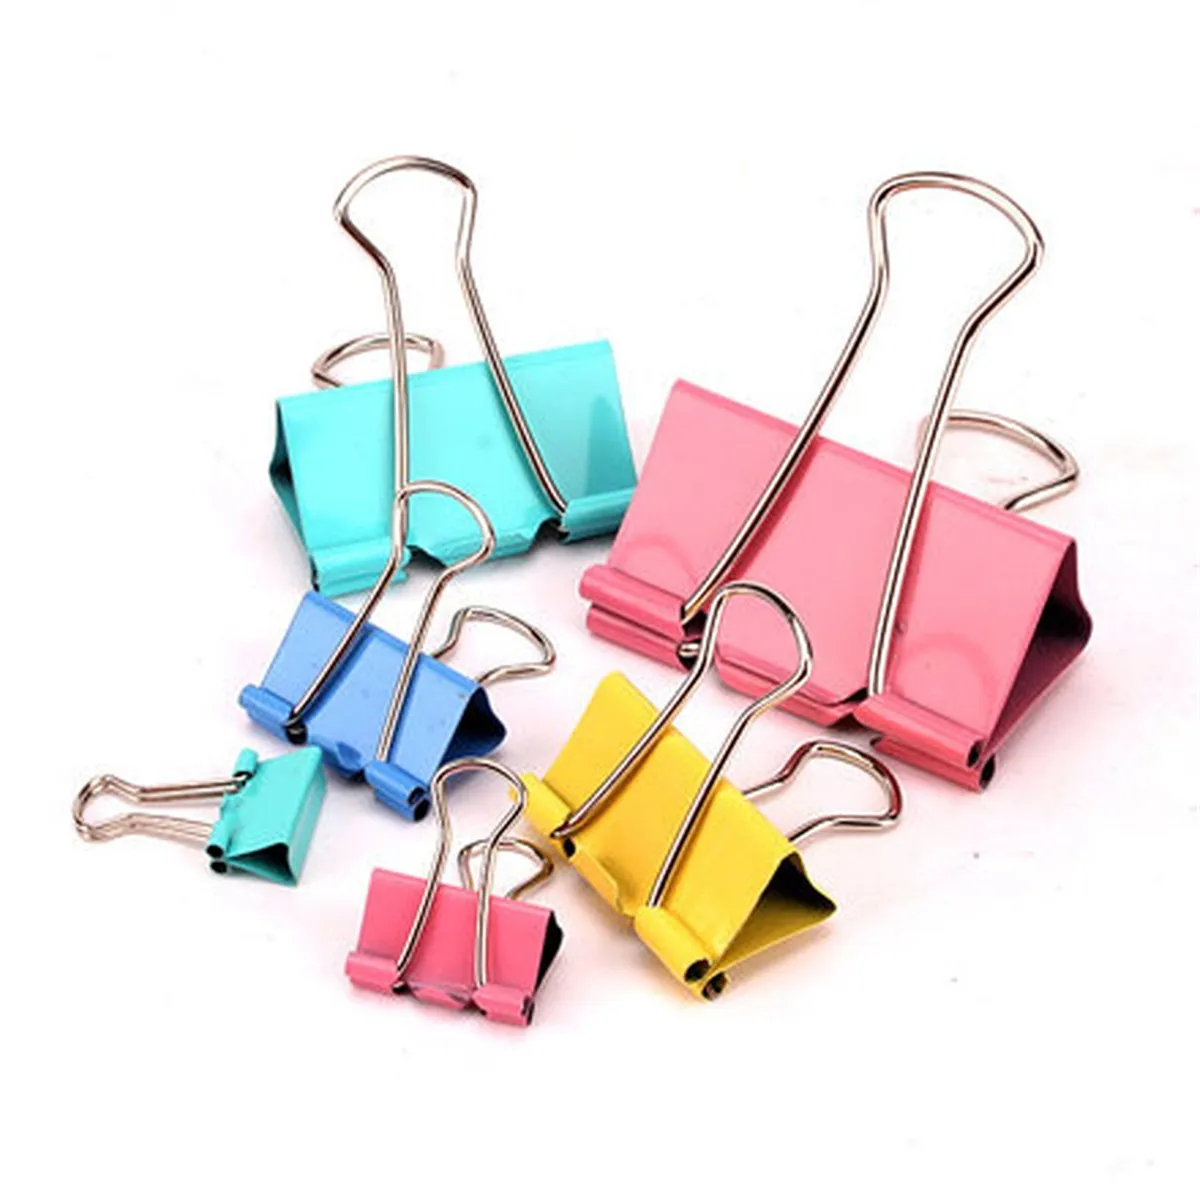 60pcs 4 Colors 6 Sizes Ins Colors Gold Sliver Rose Green Purple Binder Clips Large Medium Small Office Study Binder Clips